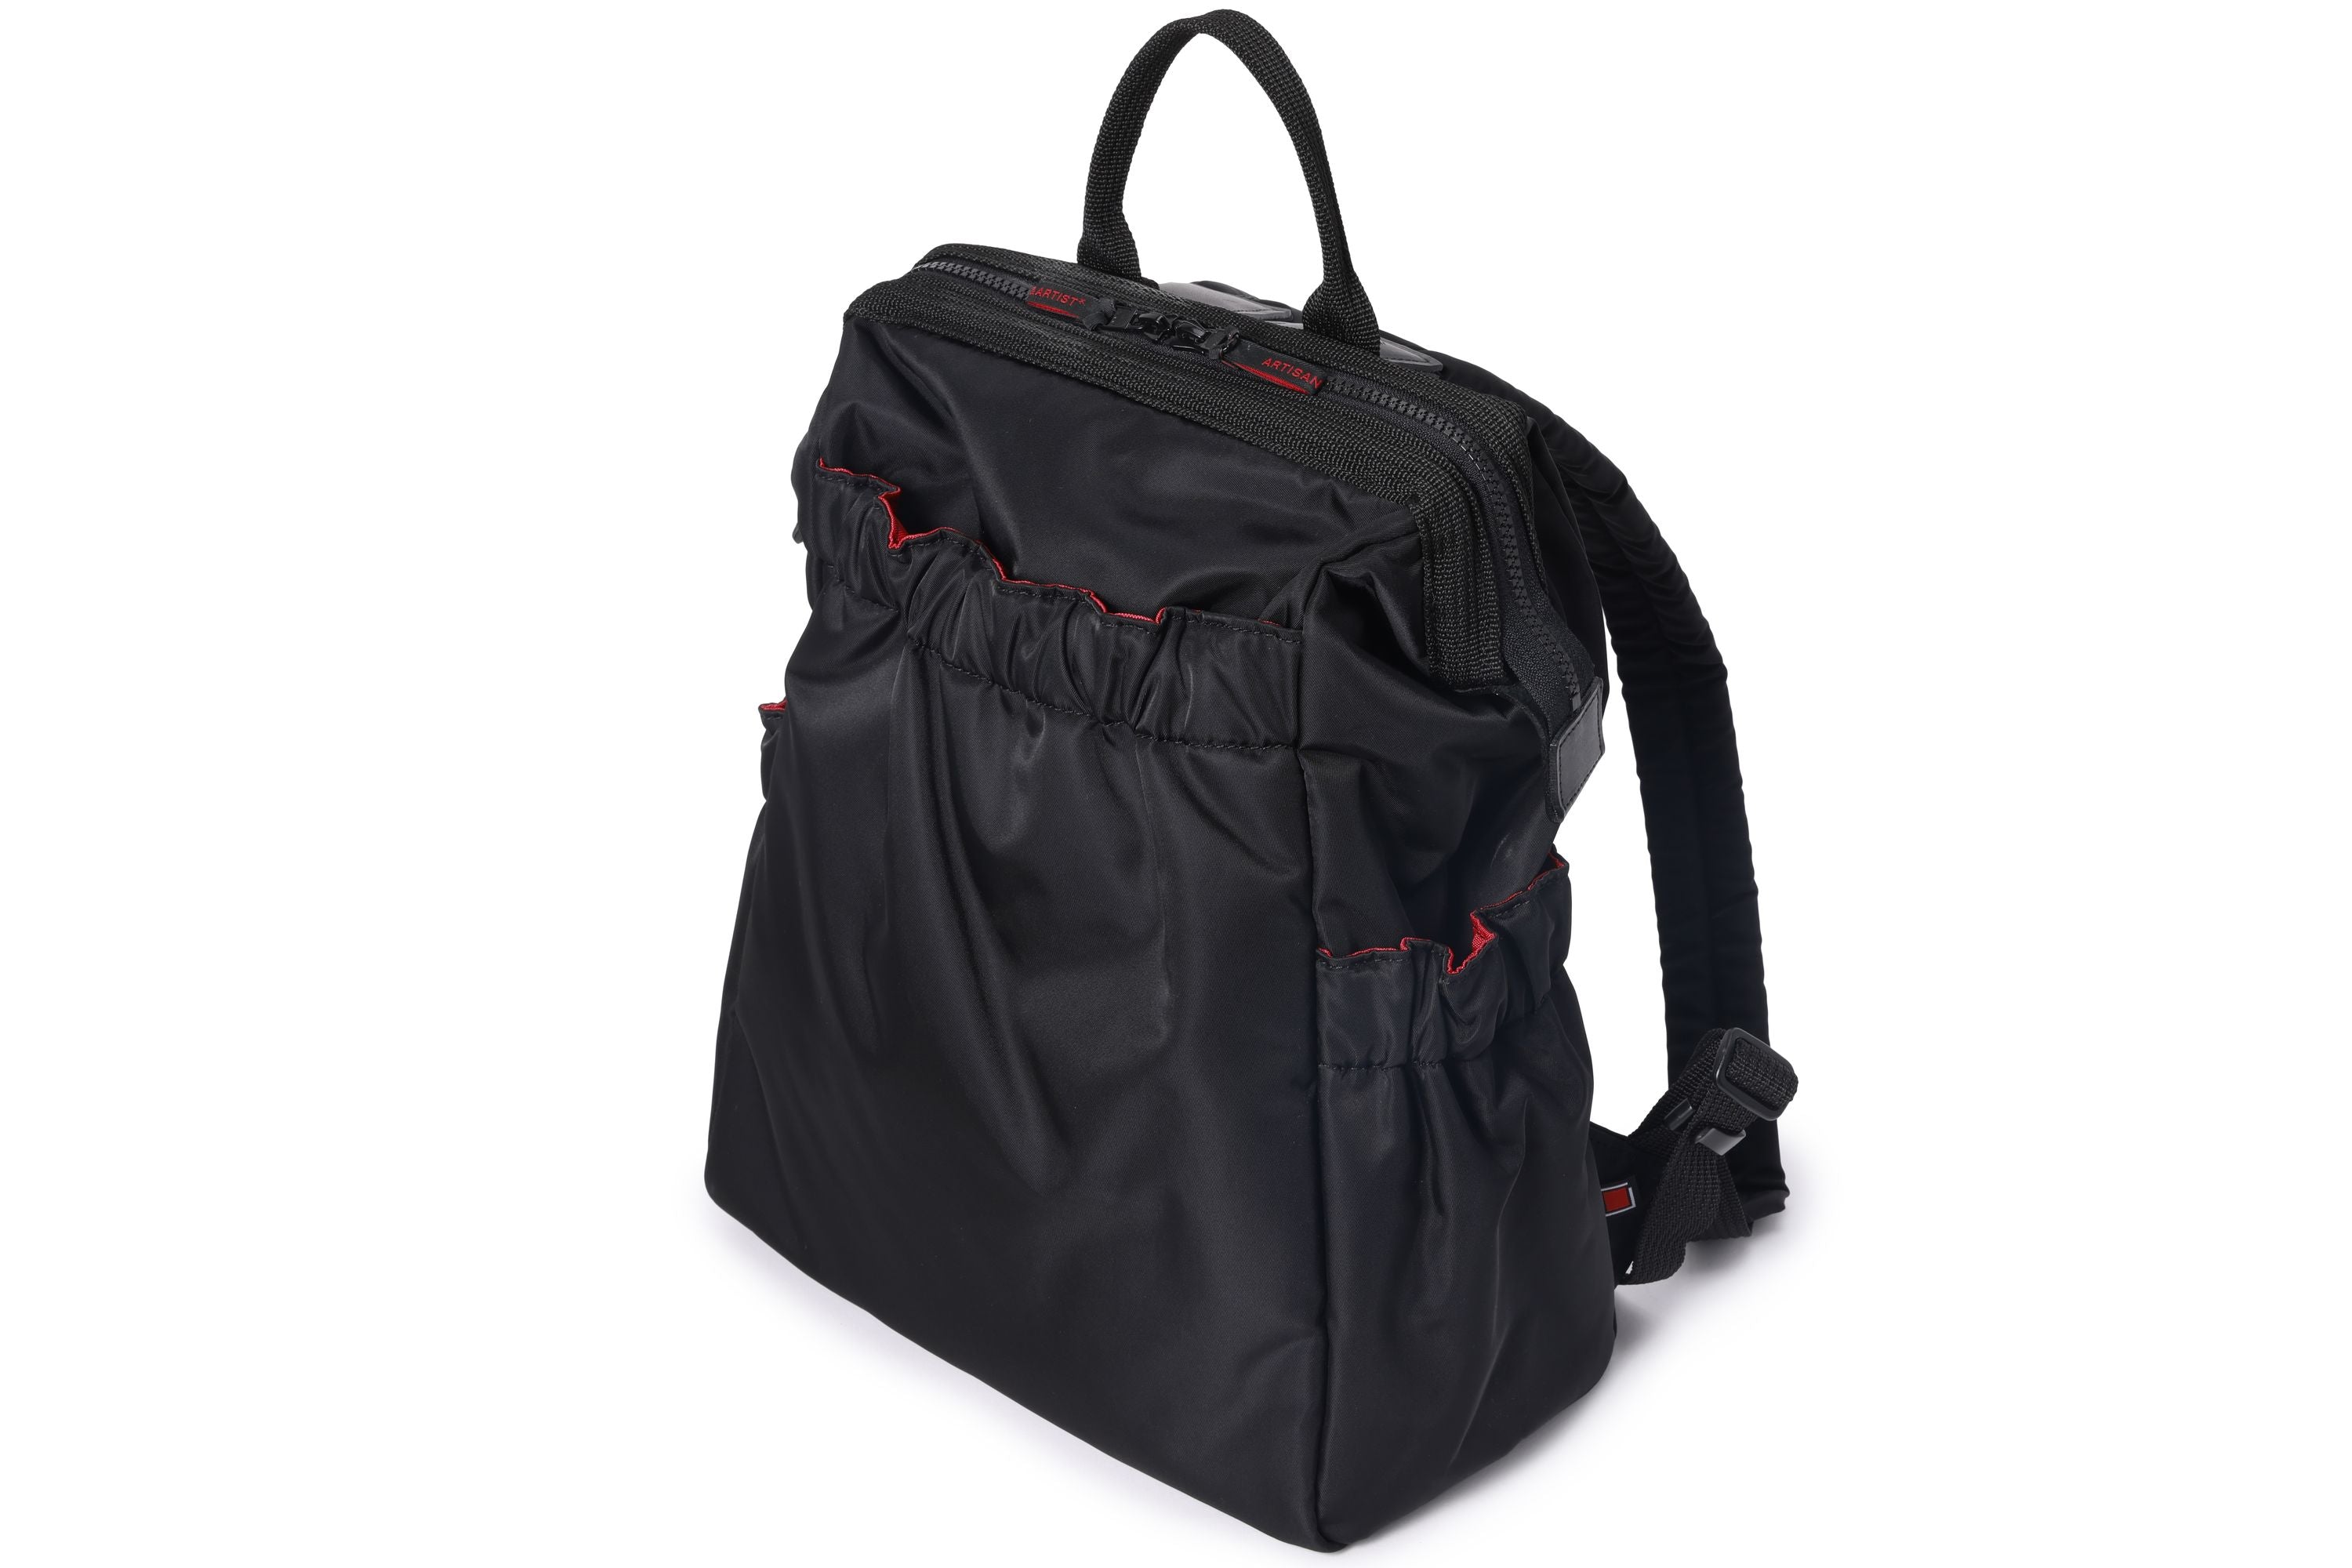 Classic - Clasp Opening Large Backpack - KG2-704